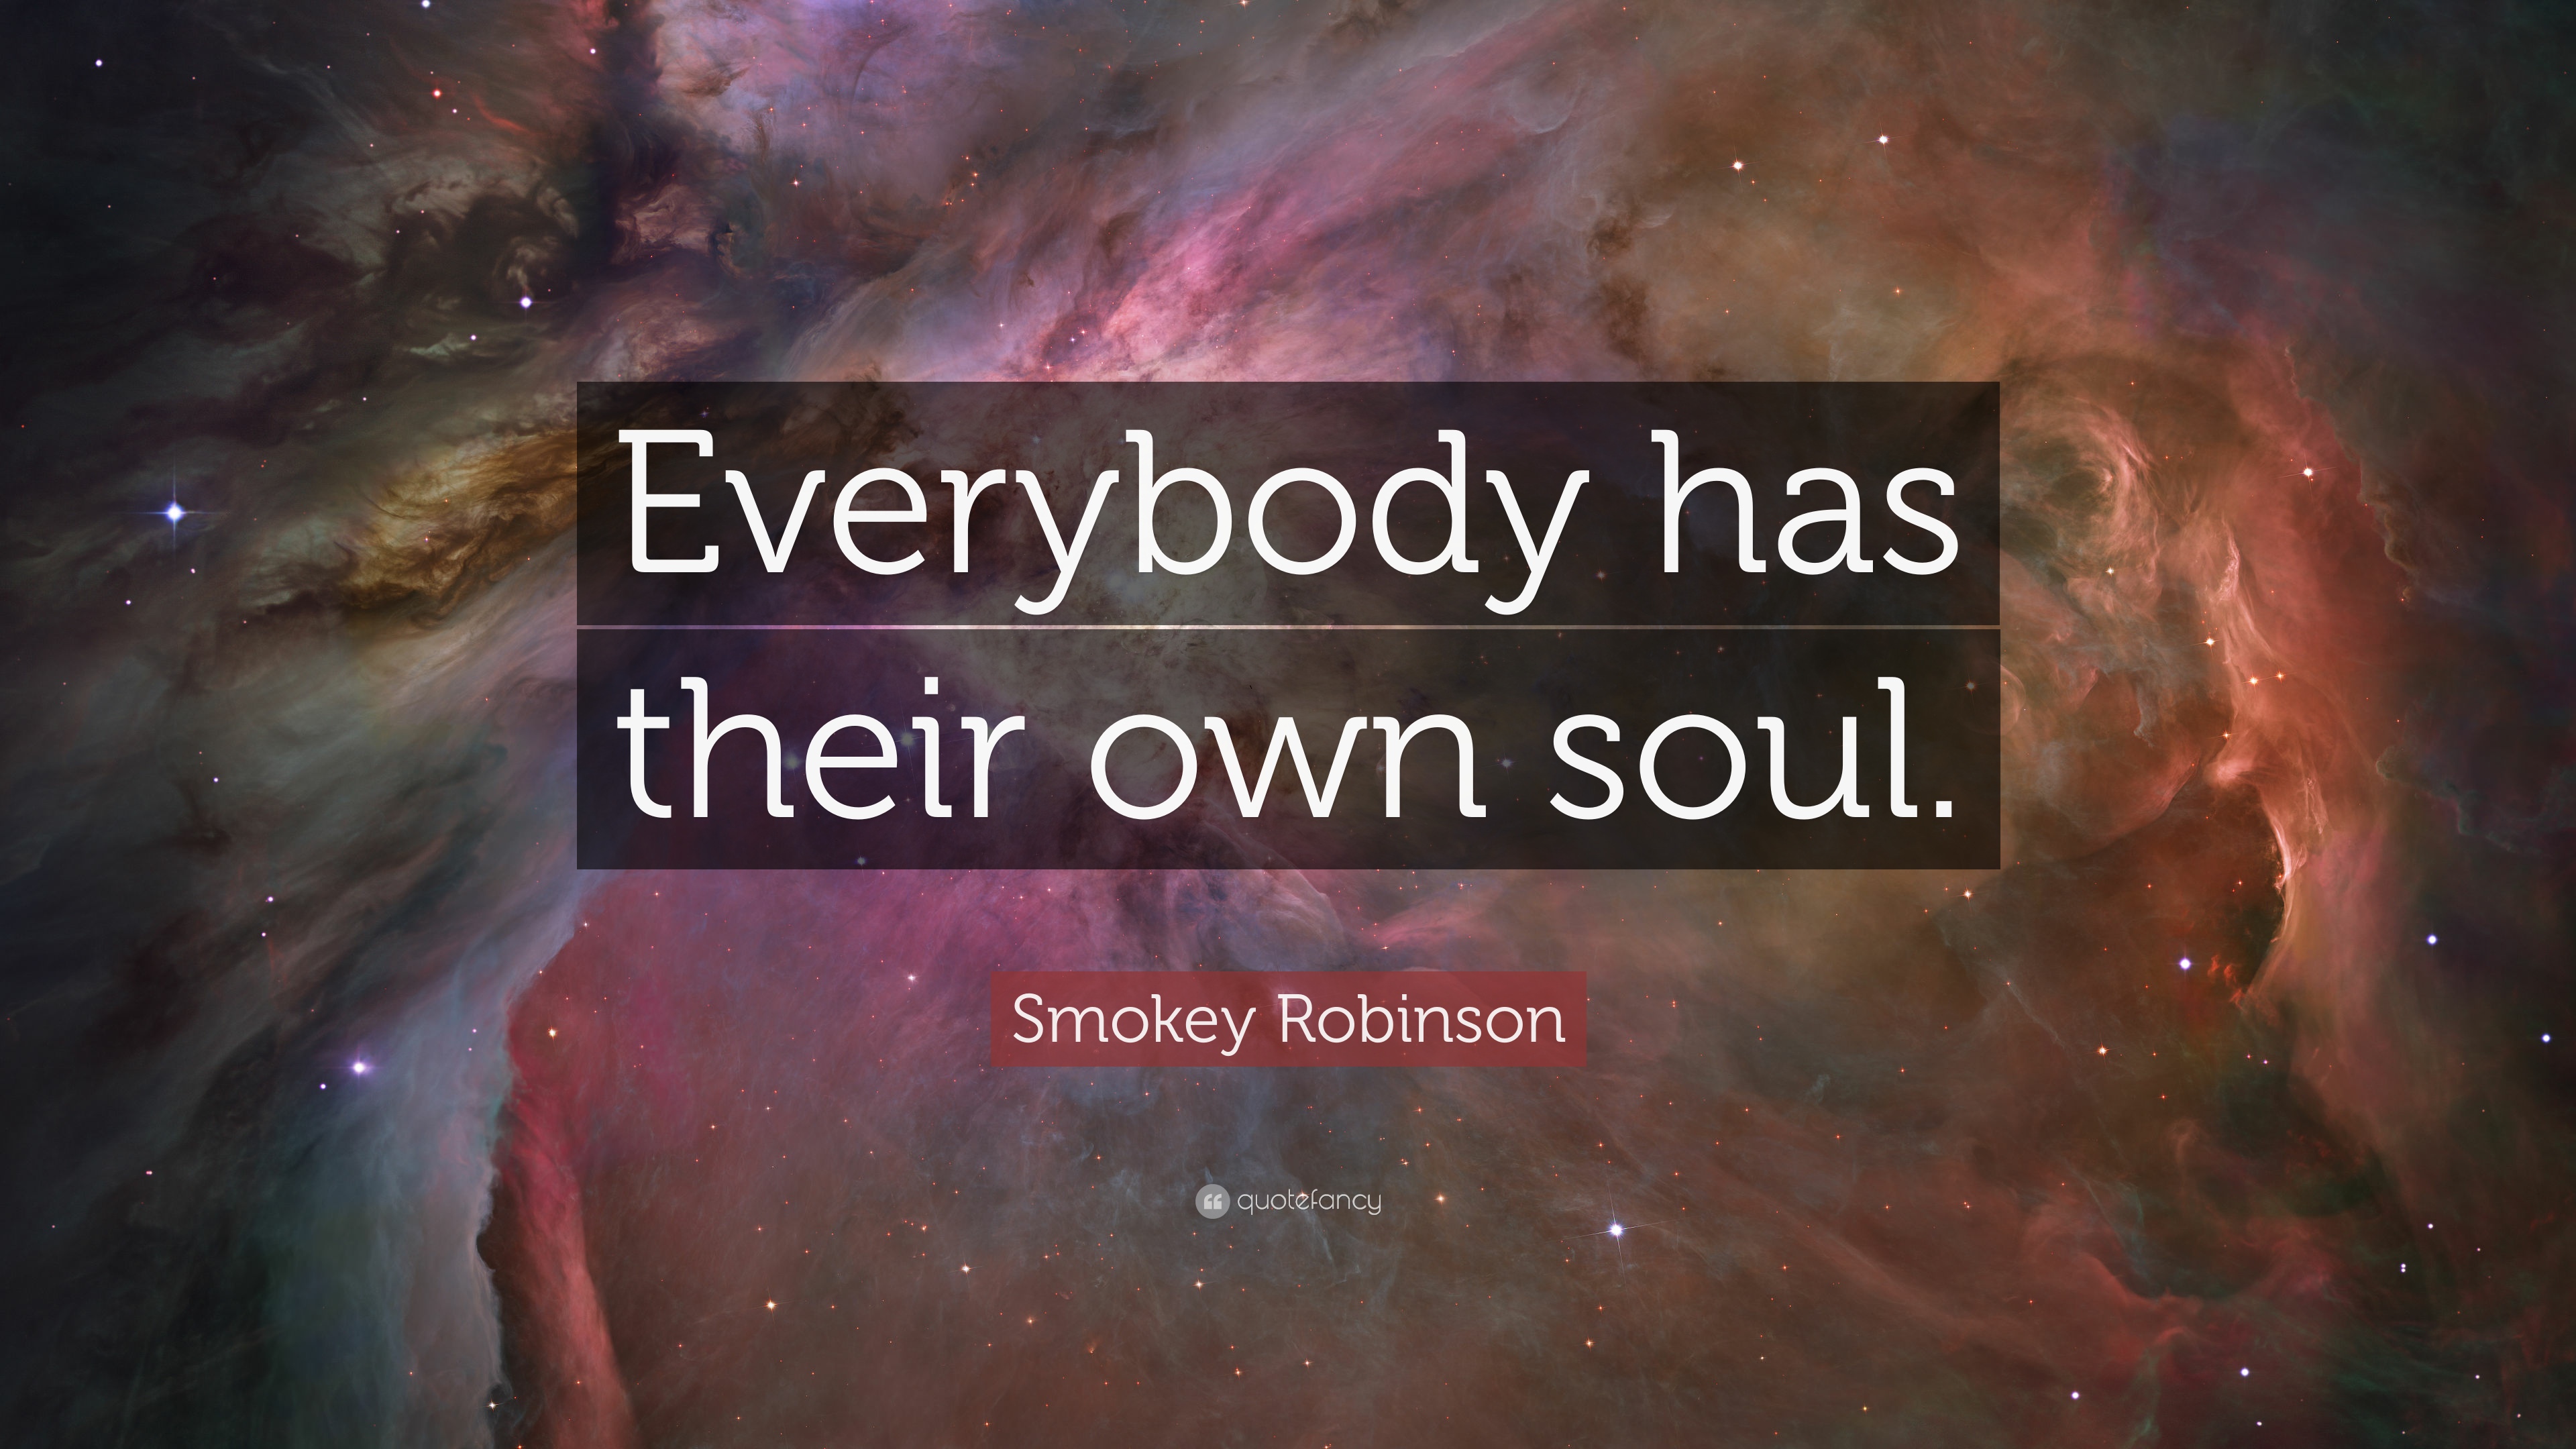 Smokey Robinson Quote: “Everybody has their own soul.” 7 wallpaper